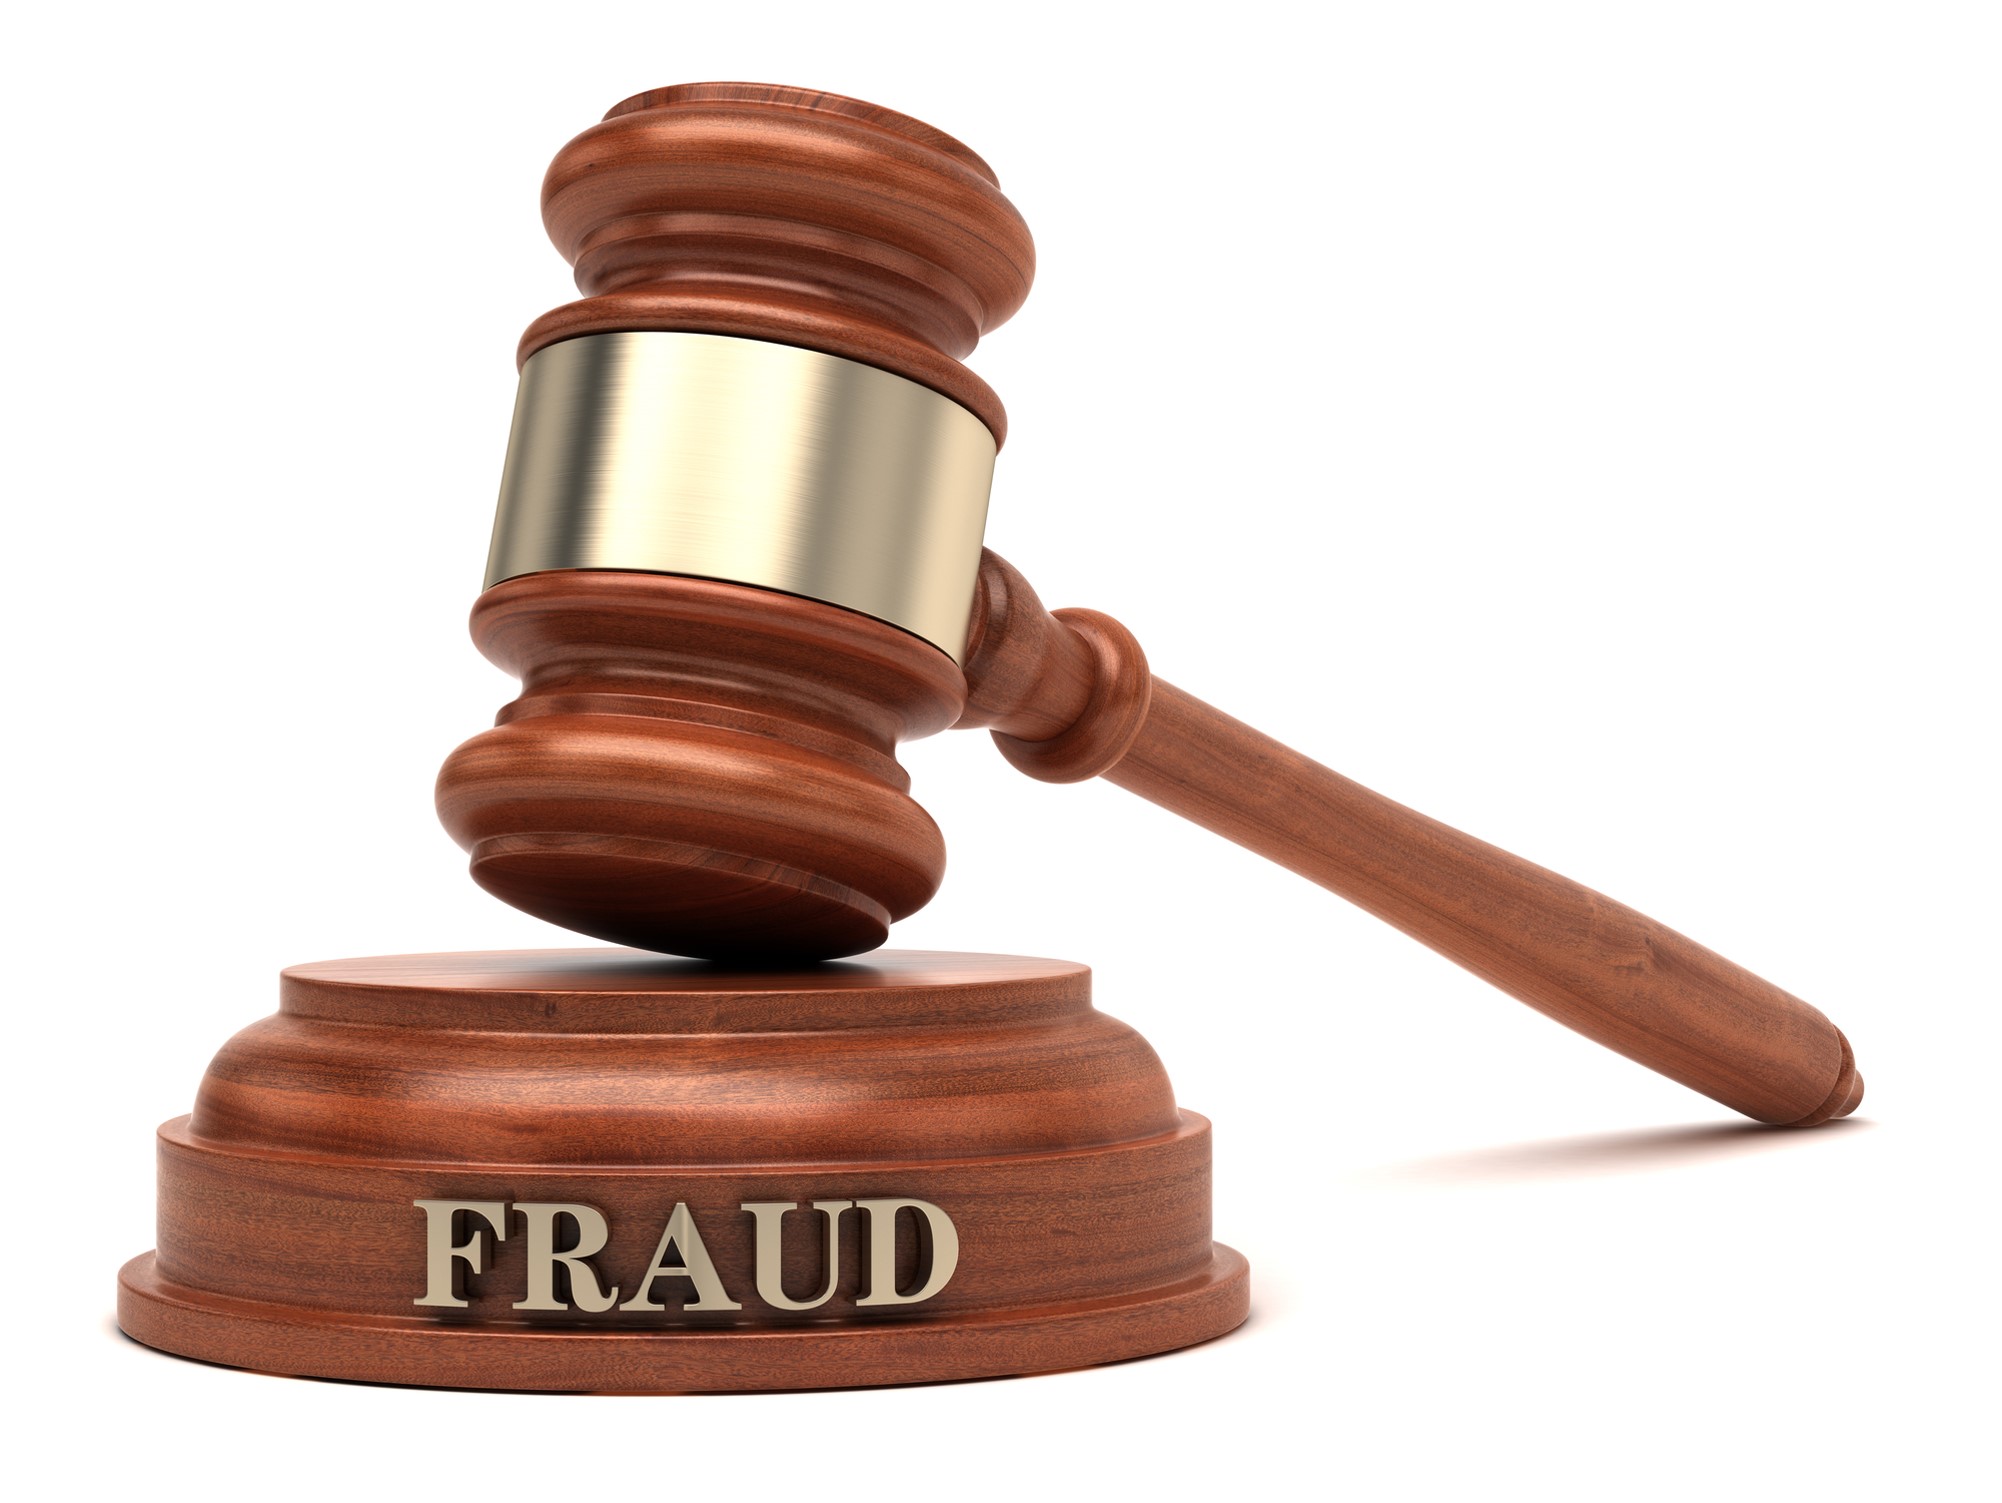 Gauteng credit controller accused of defrauding her boss of R2.8 million